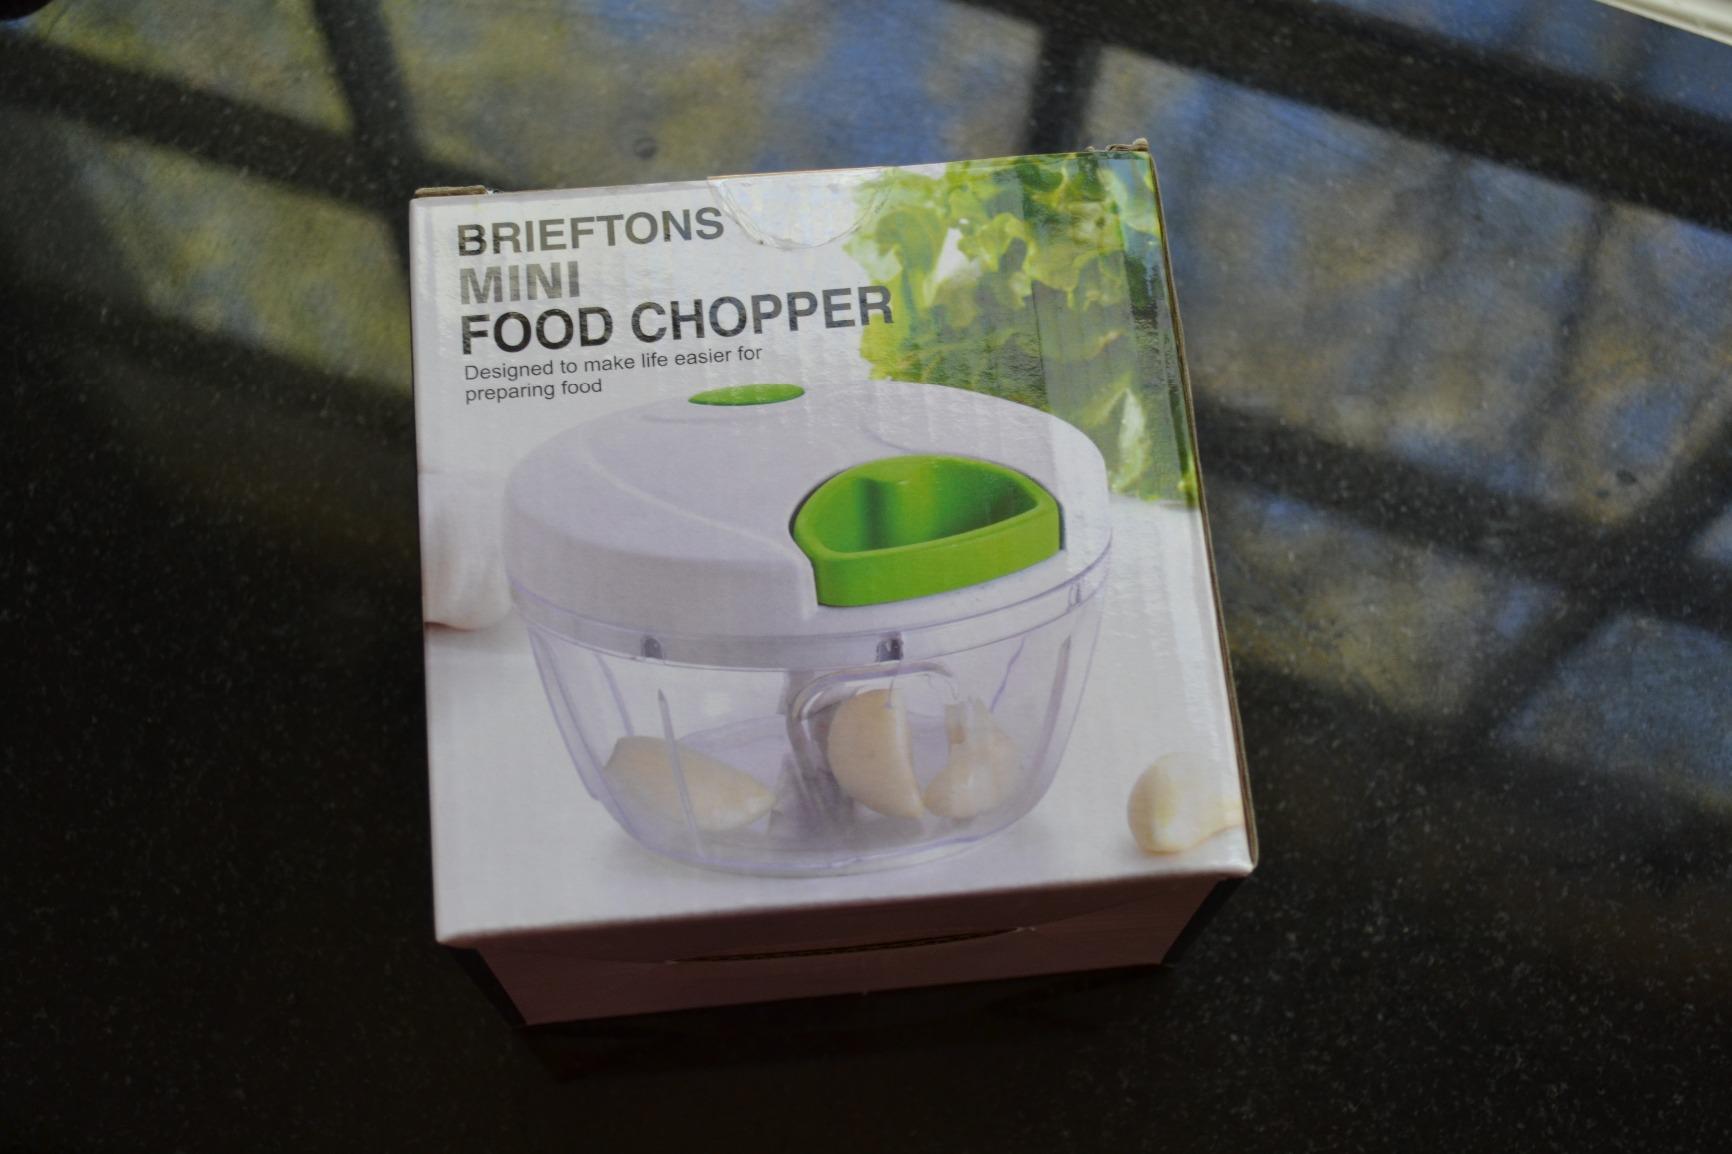 Brieftons Manual Food Chopper, Compact & Powerful Hand Held Vegetable  Chopper / Blender to Chop Fruits / Vegetables / Nuts /